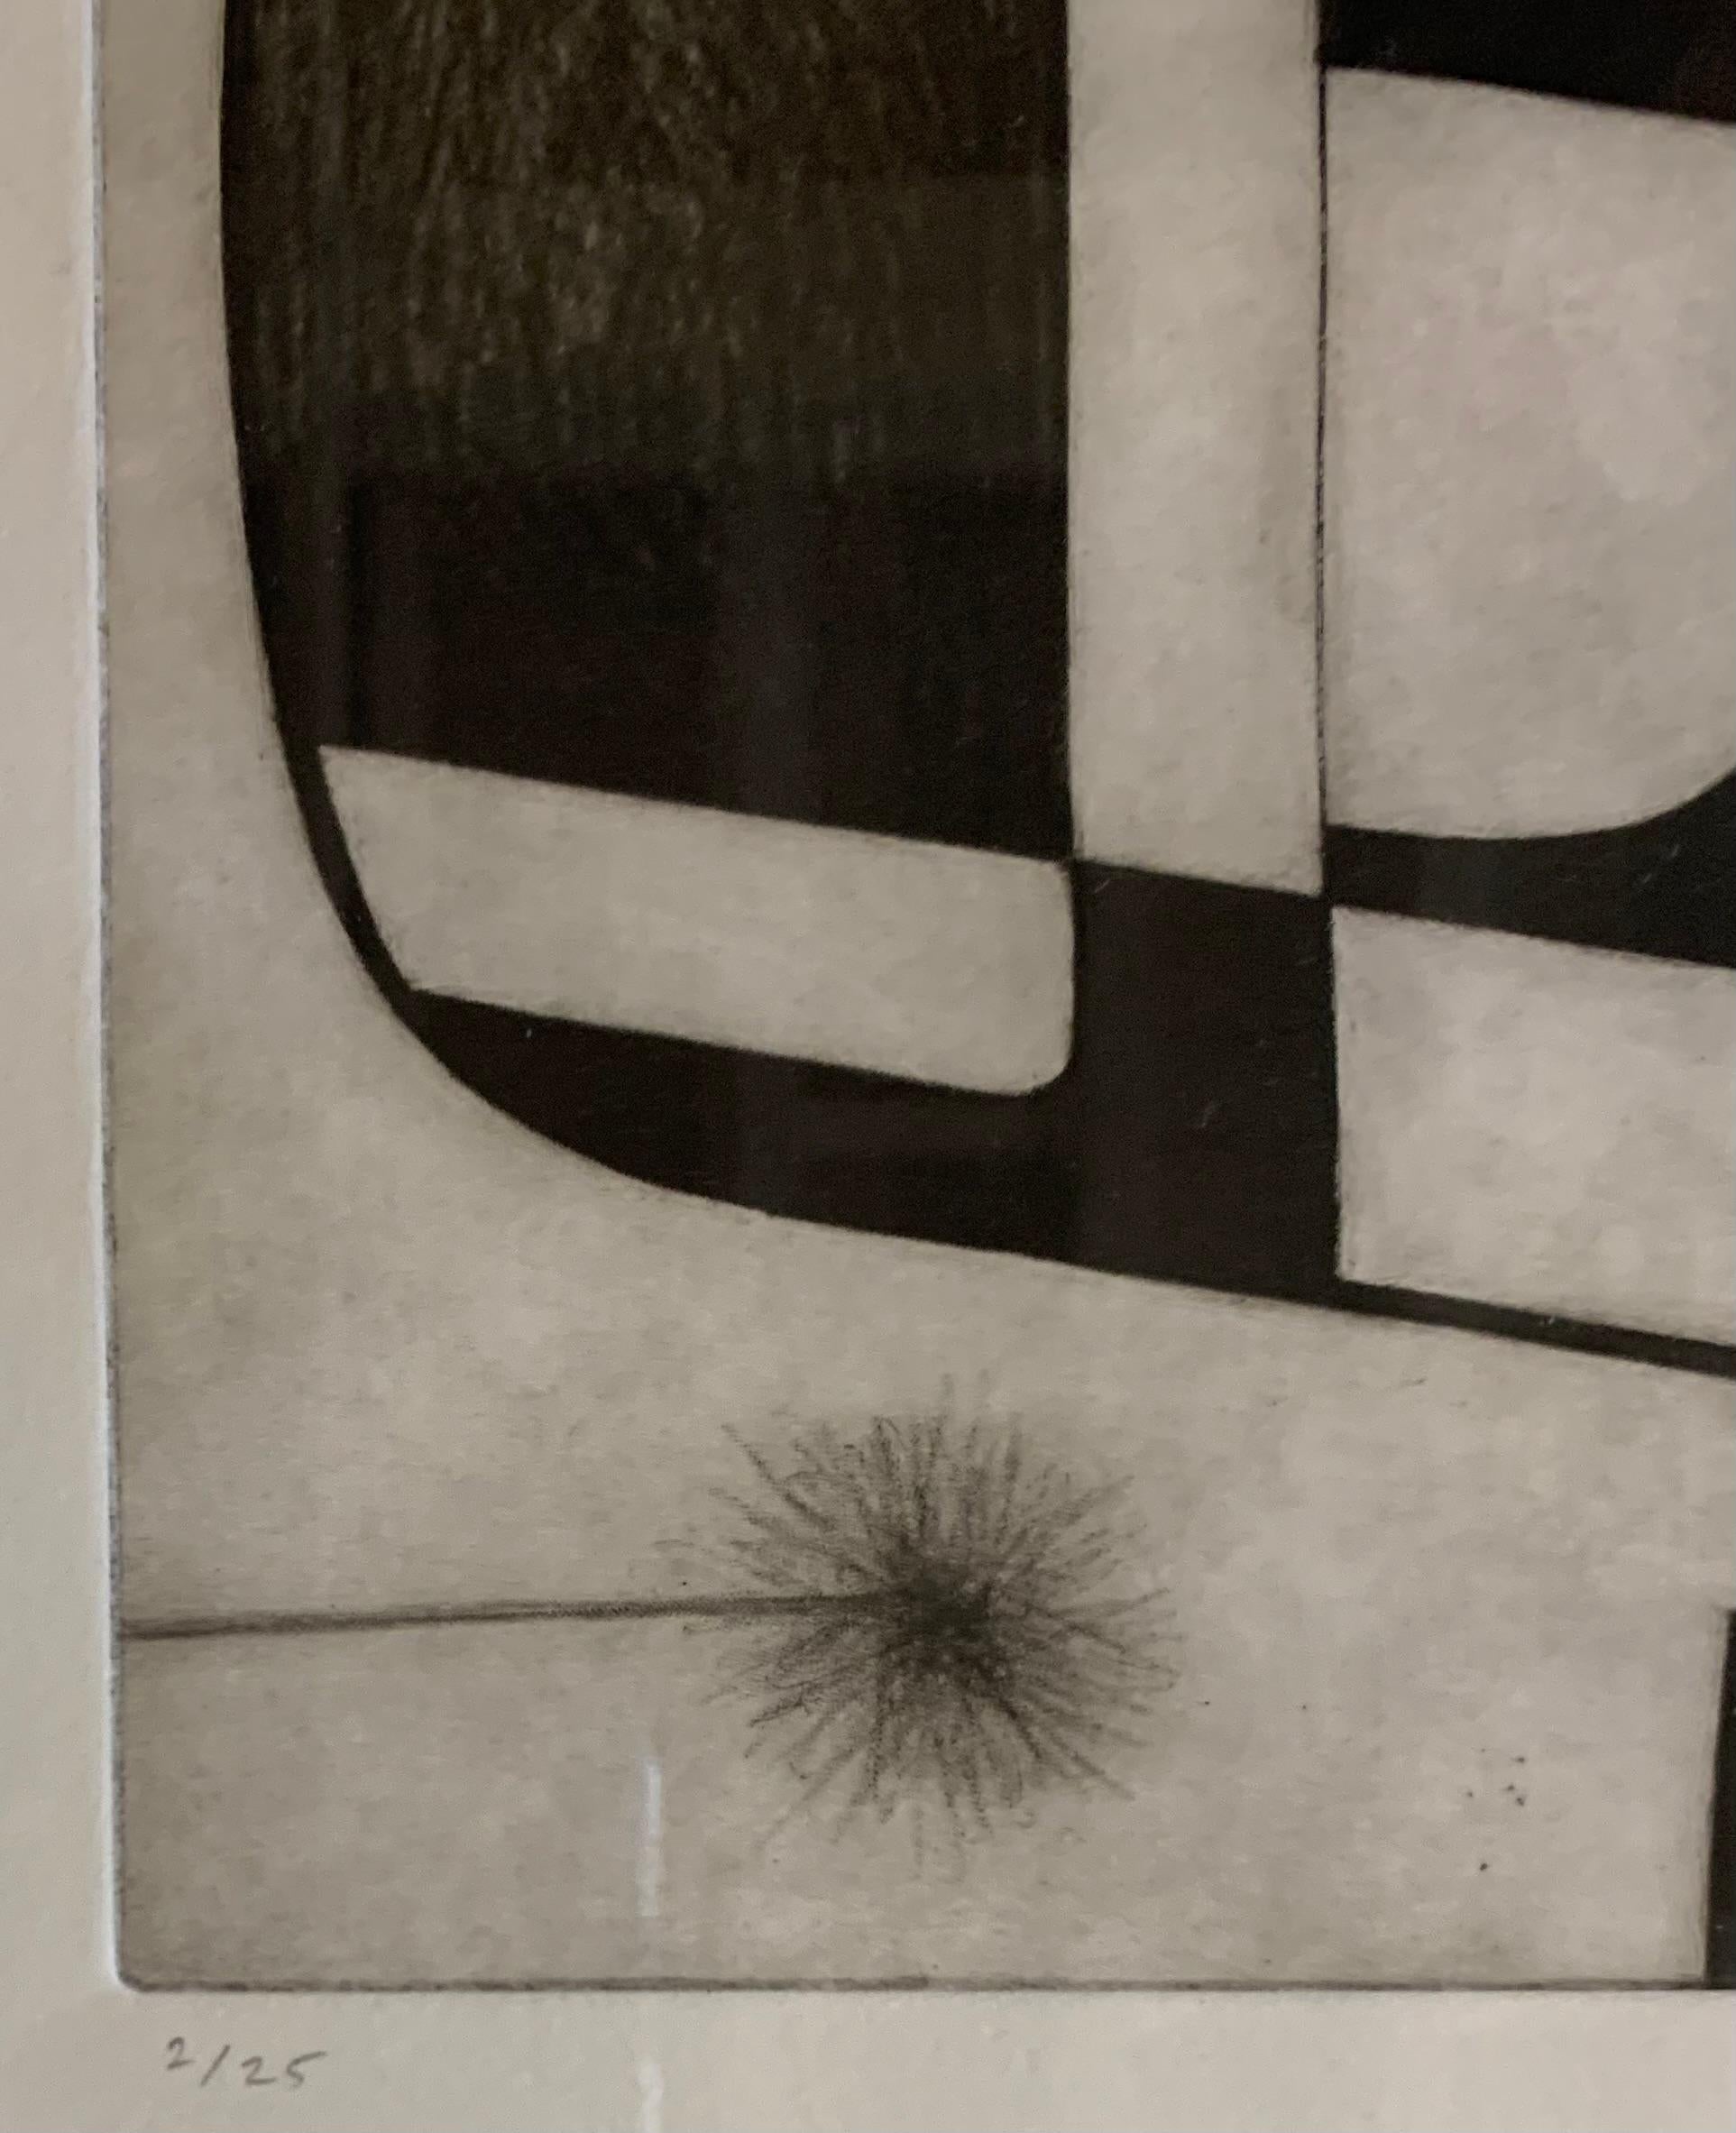 Contemporary abstract black and white etching by English artist Oliver Gaiger.
Matted and framed in a black wood frame.
Part of a large collection of black and white etchings by the artist.
Oliver Gaiger was born in 1972 in Uganda and lives and